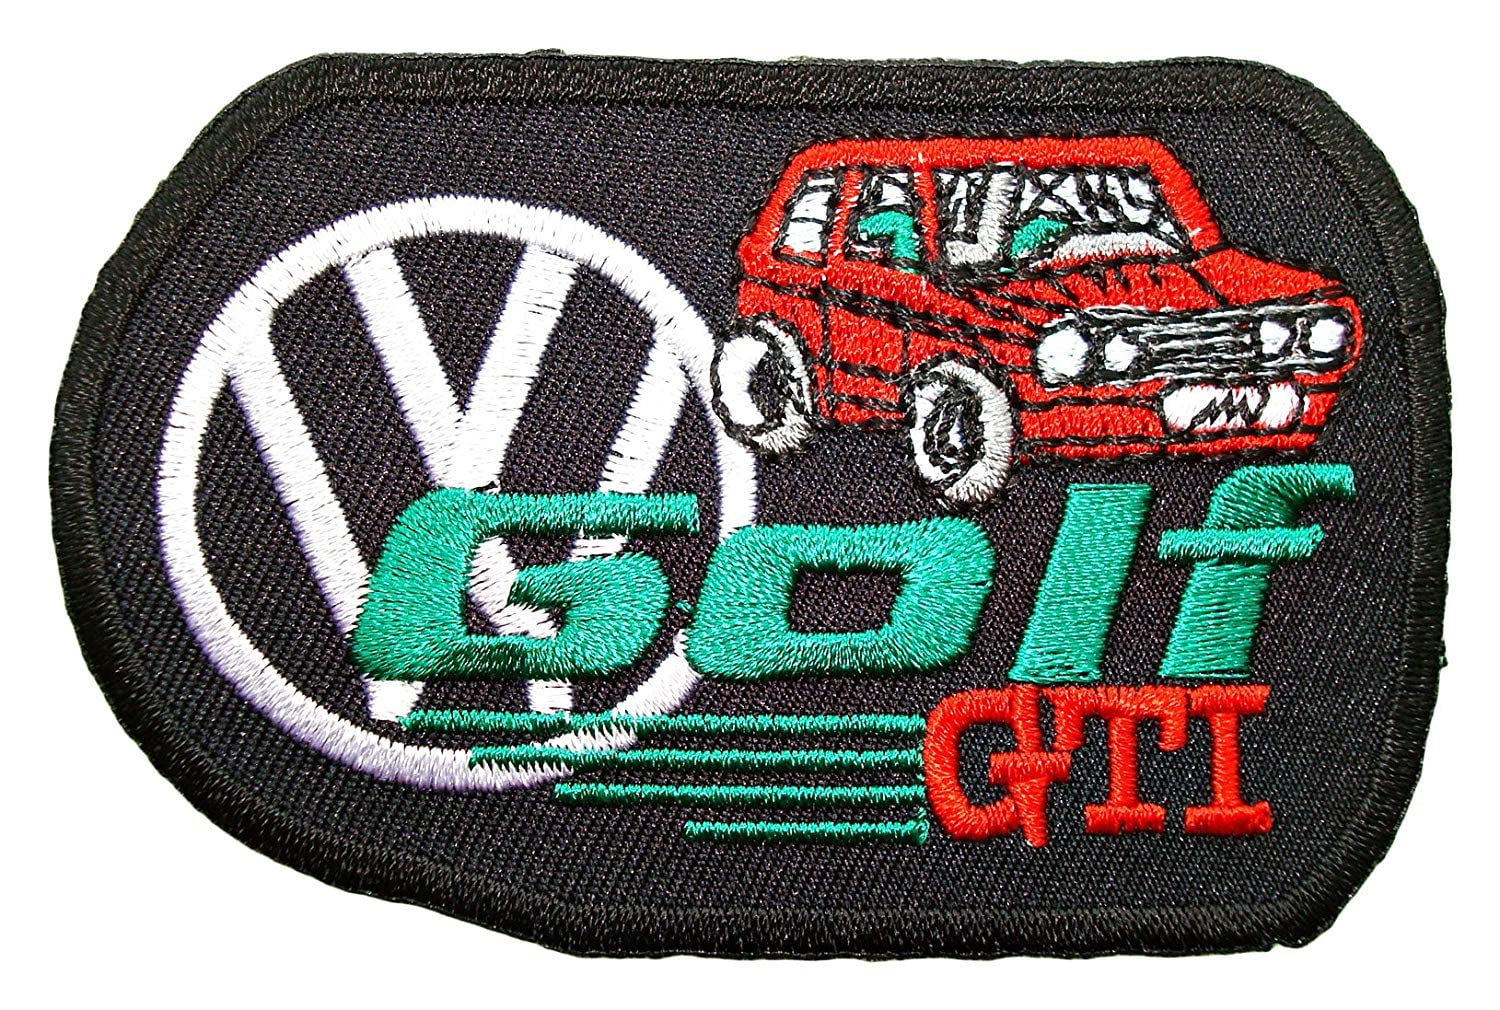 VW Volkswagen Rabbit Golf GTI MK1 Club Logo Shirts Embroidered Patch  x   Logo Sew Ironed On Badge Embroidery Applique Patch. 